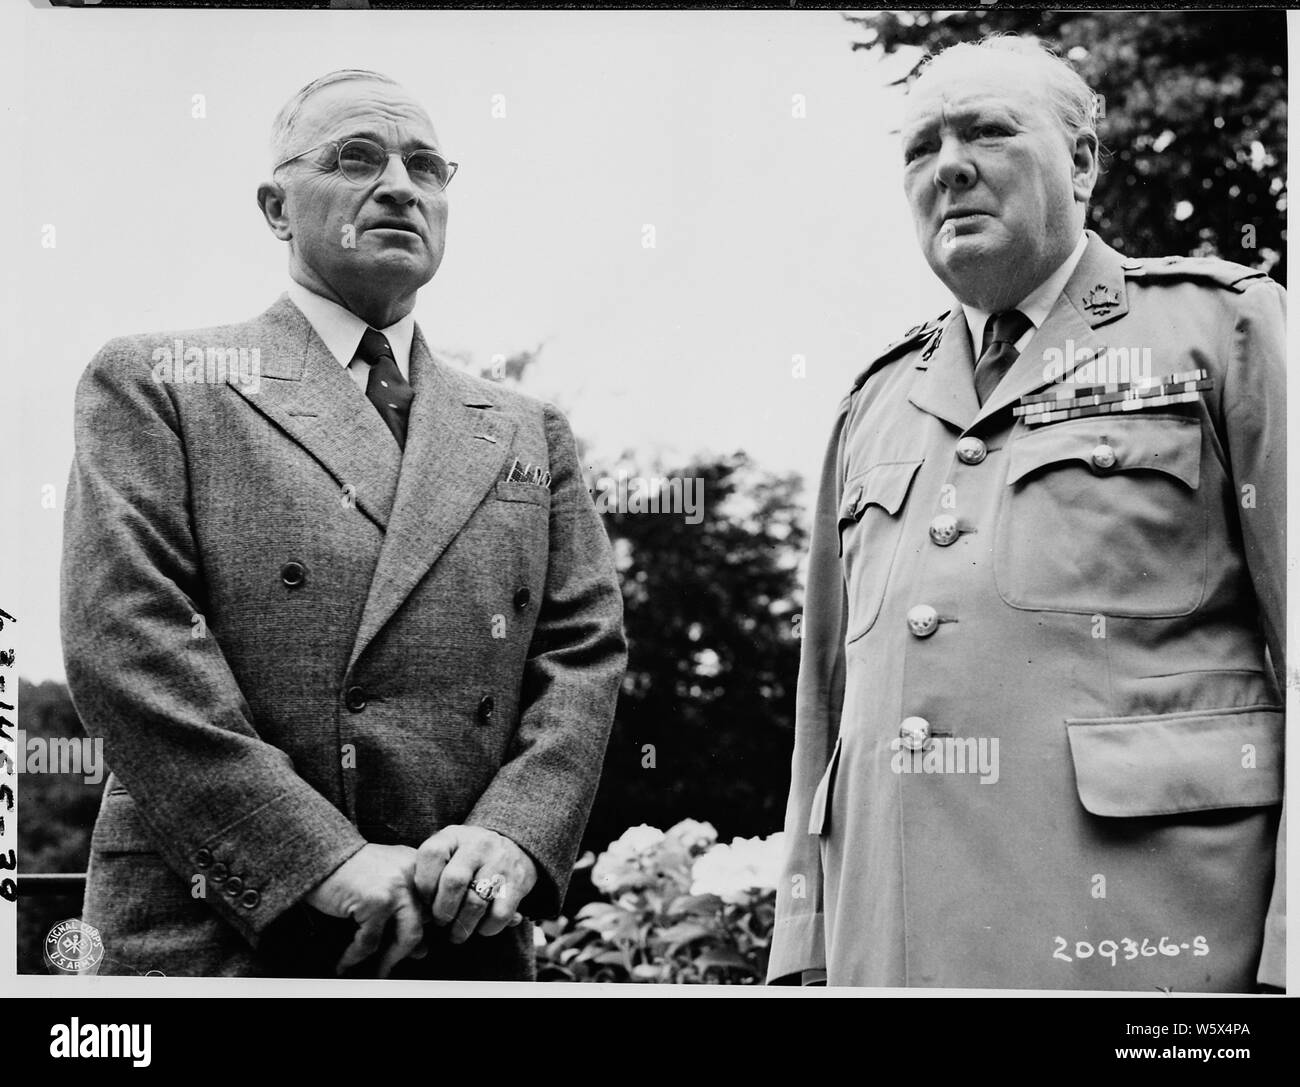 President Harry S. Truman poses with British Prime Minister Winston Churchill during their visit at the residence of Mr. Churchill during the Potsdam Conference in Germany. Stock Photo